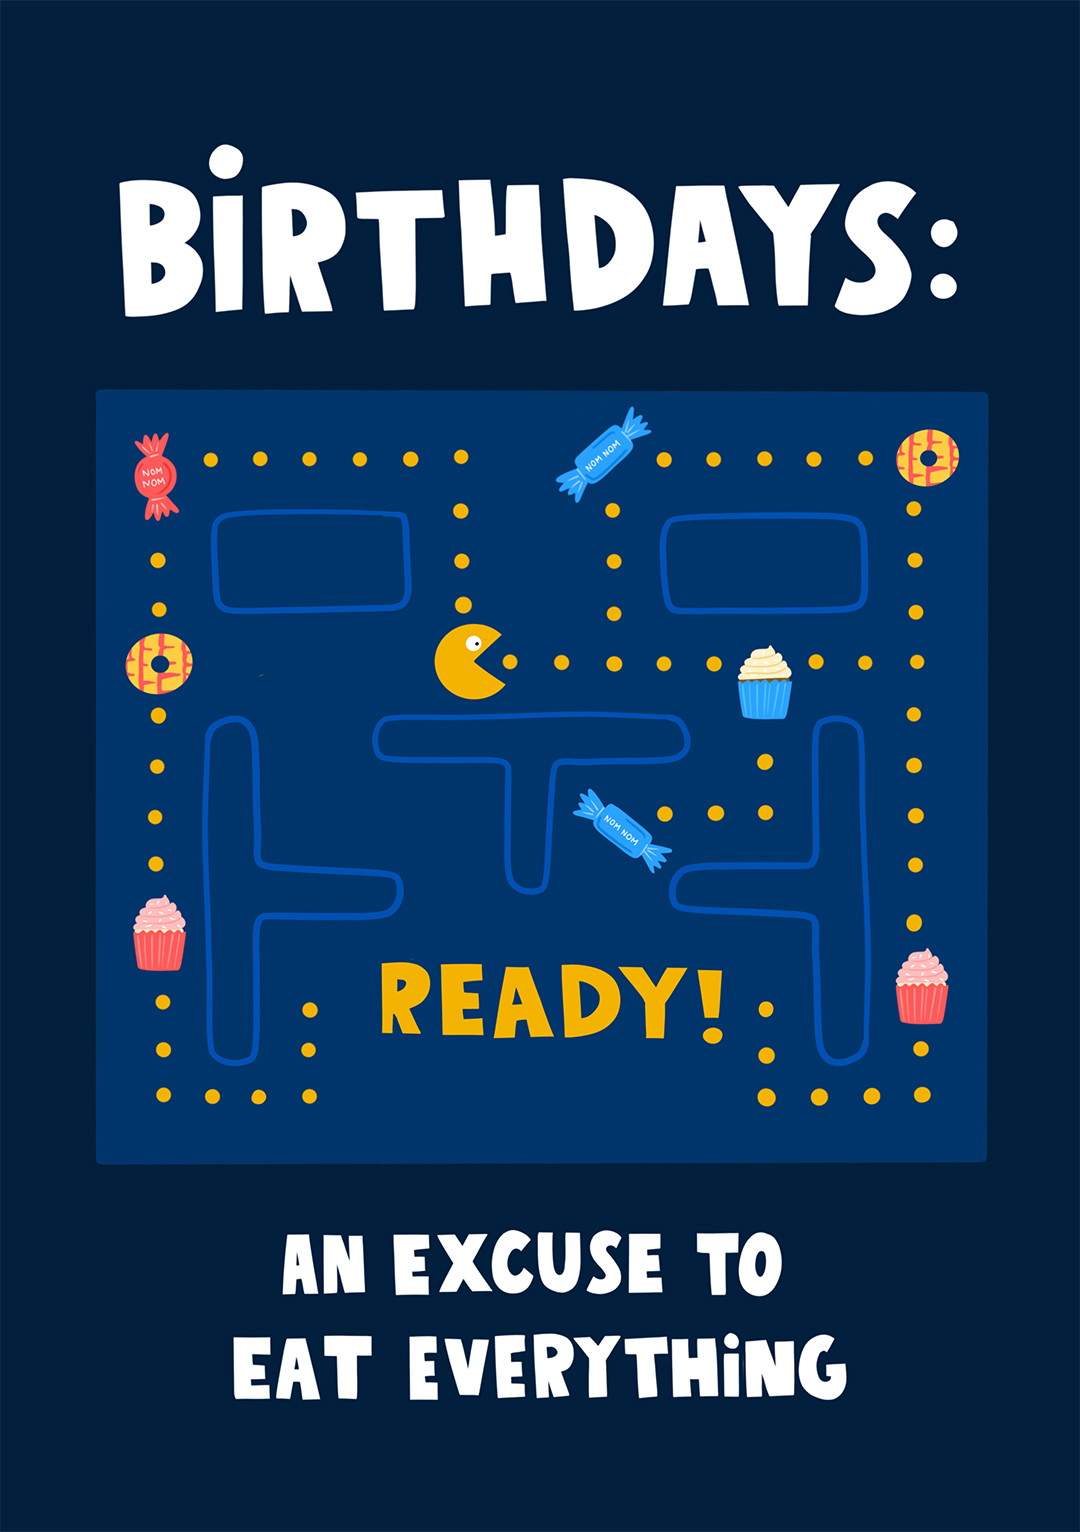 pac-man excuse to eat everything birthday card